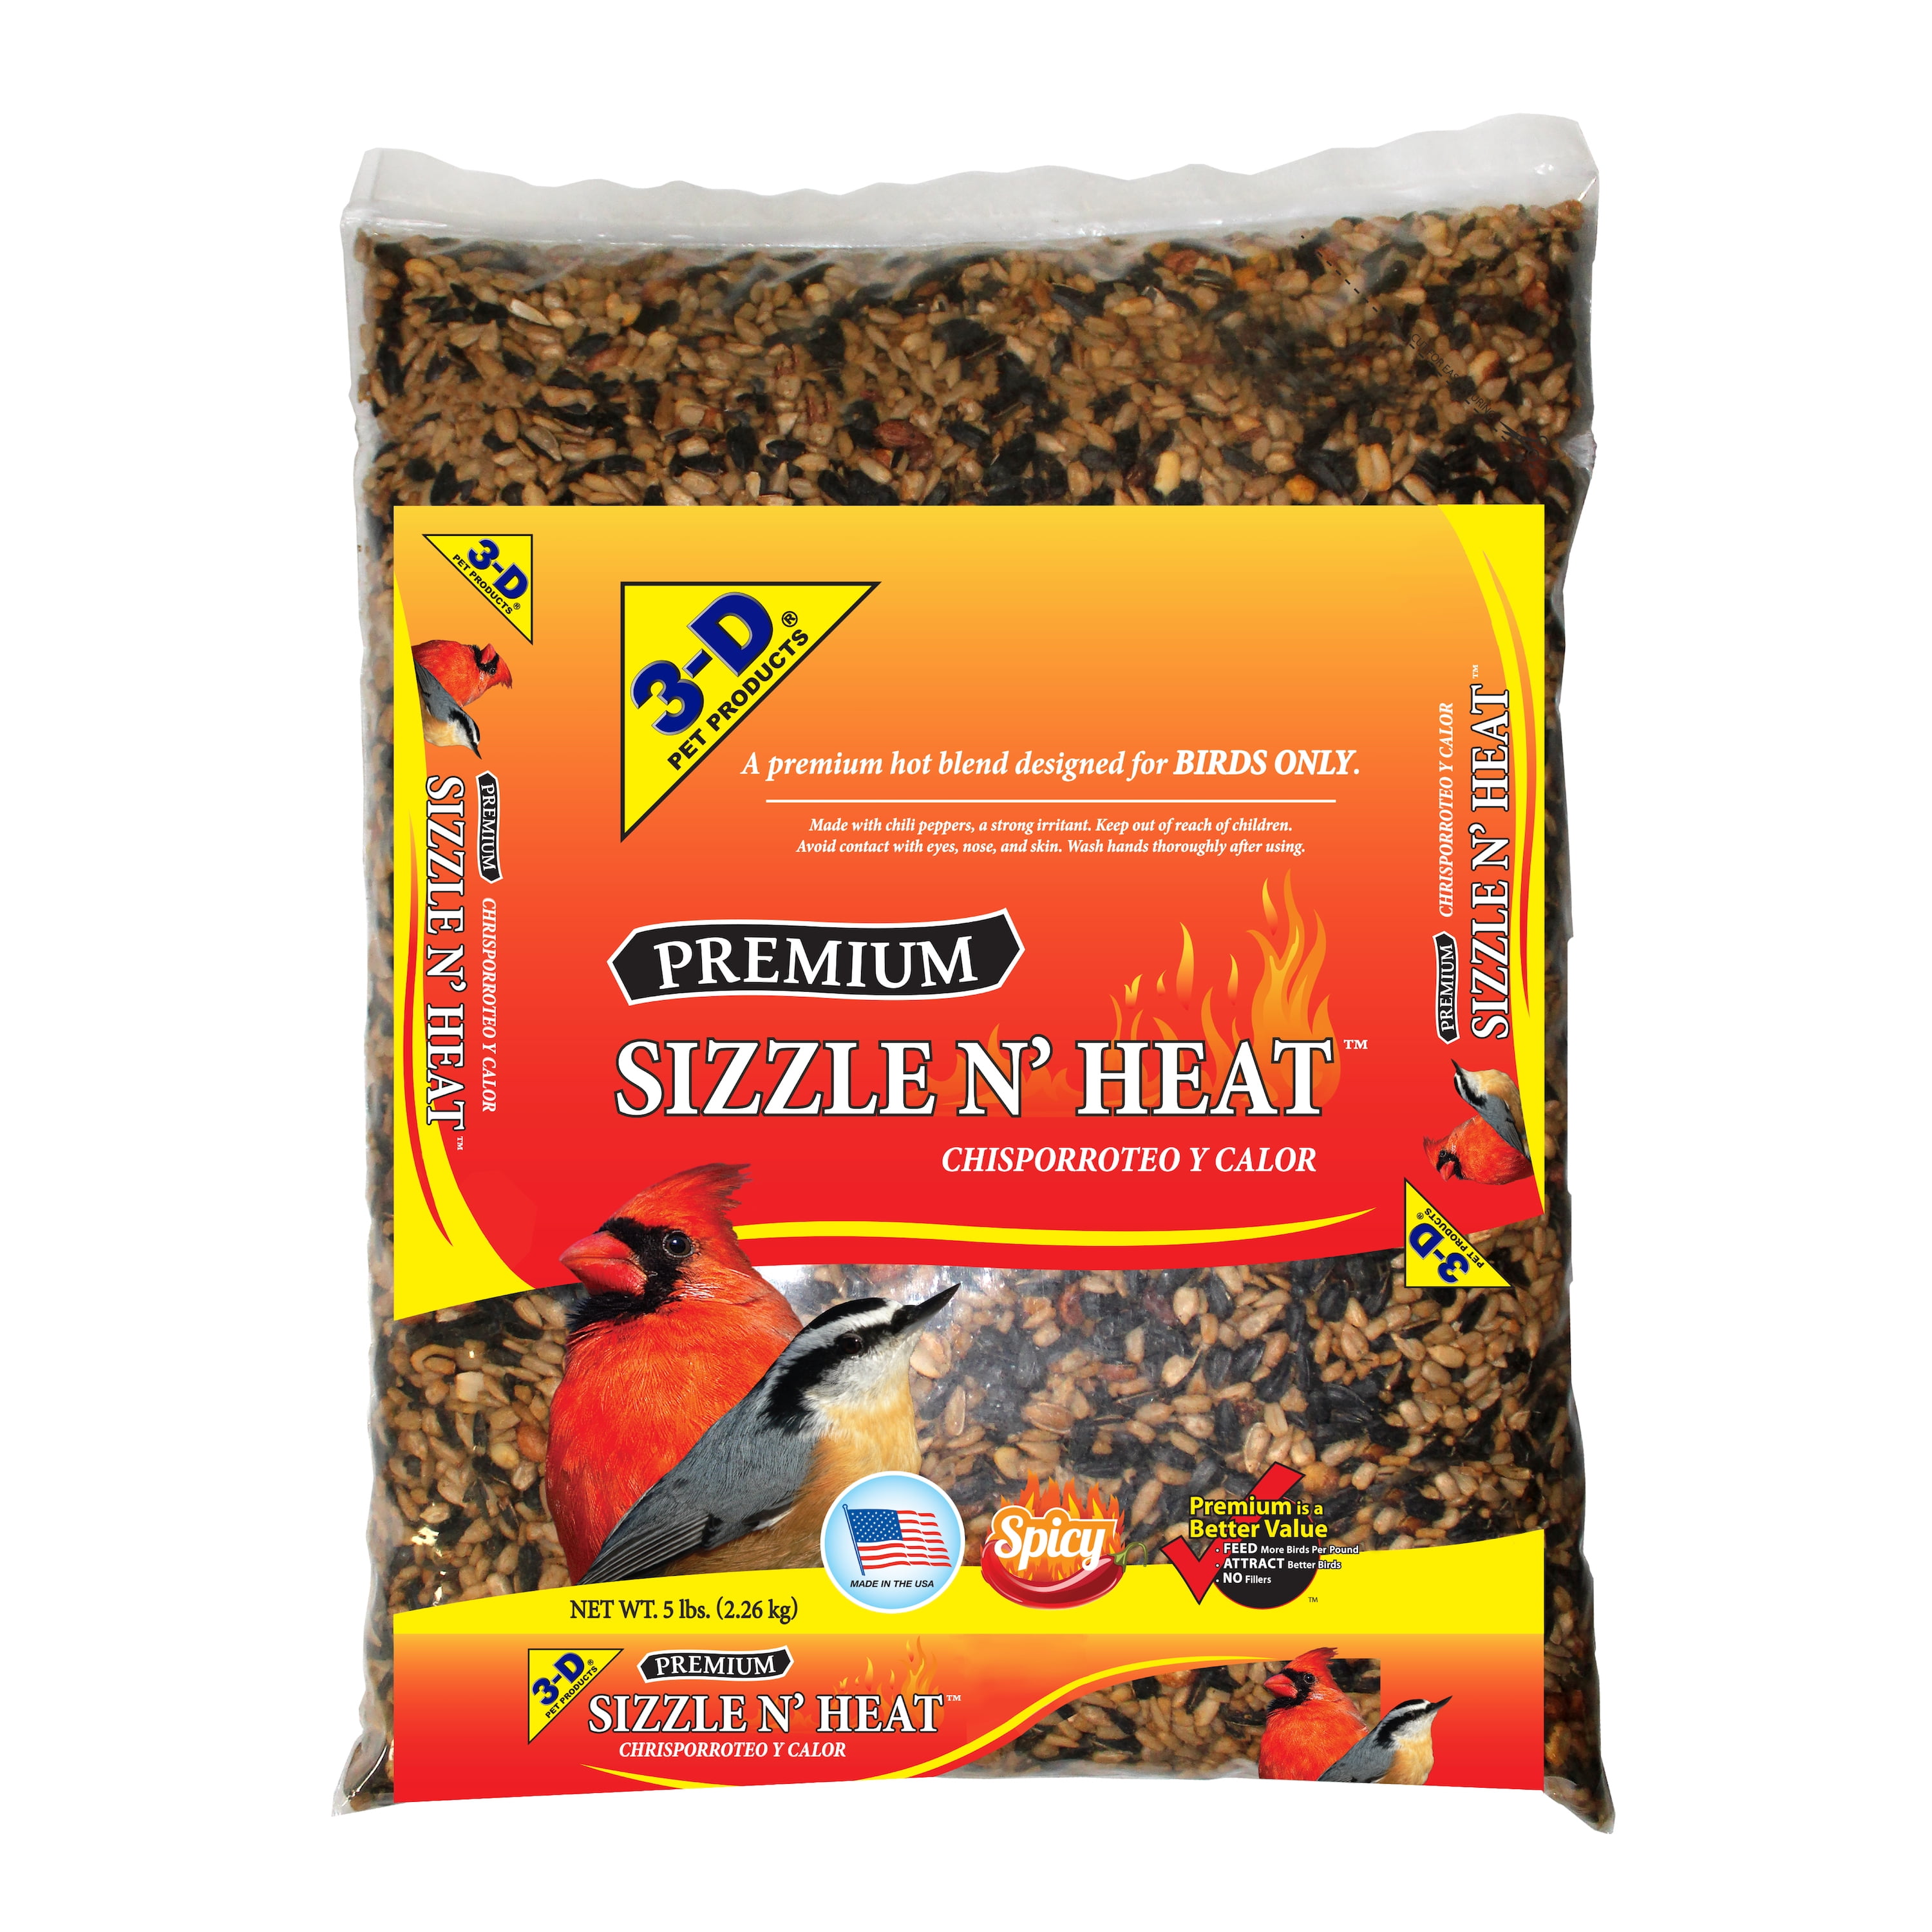 Birds on the Brink Parrot Food Fortified Daily Blend no sunflower seed  10lb 